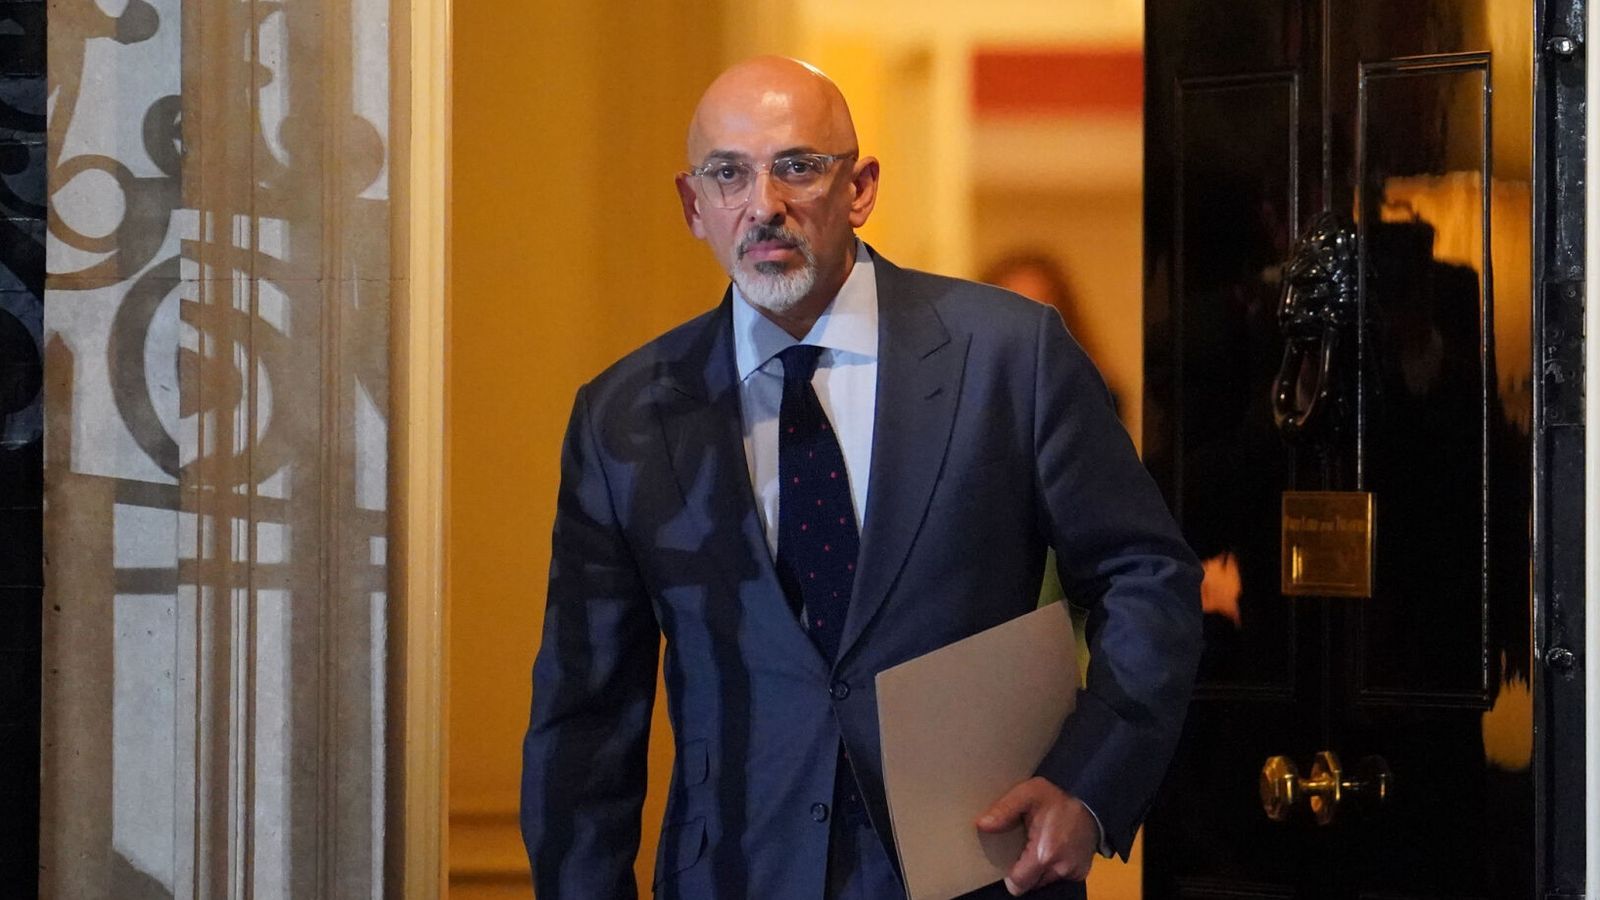 Nadhim Zahawi: Former chancellor and vaccines minister will stand down at general election